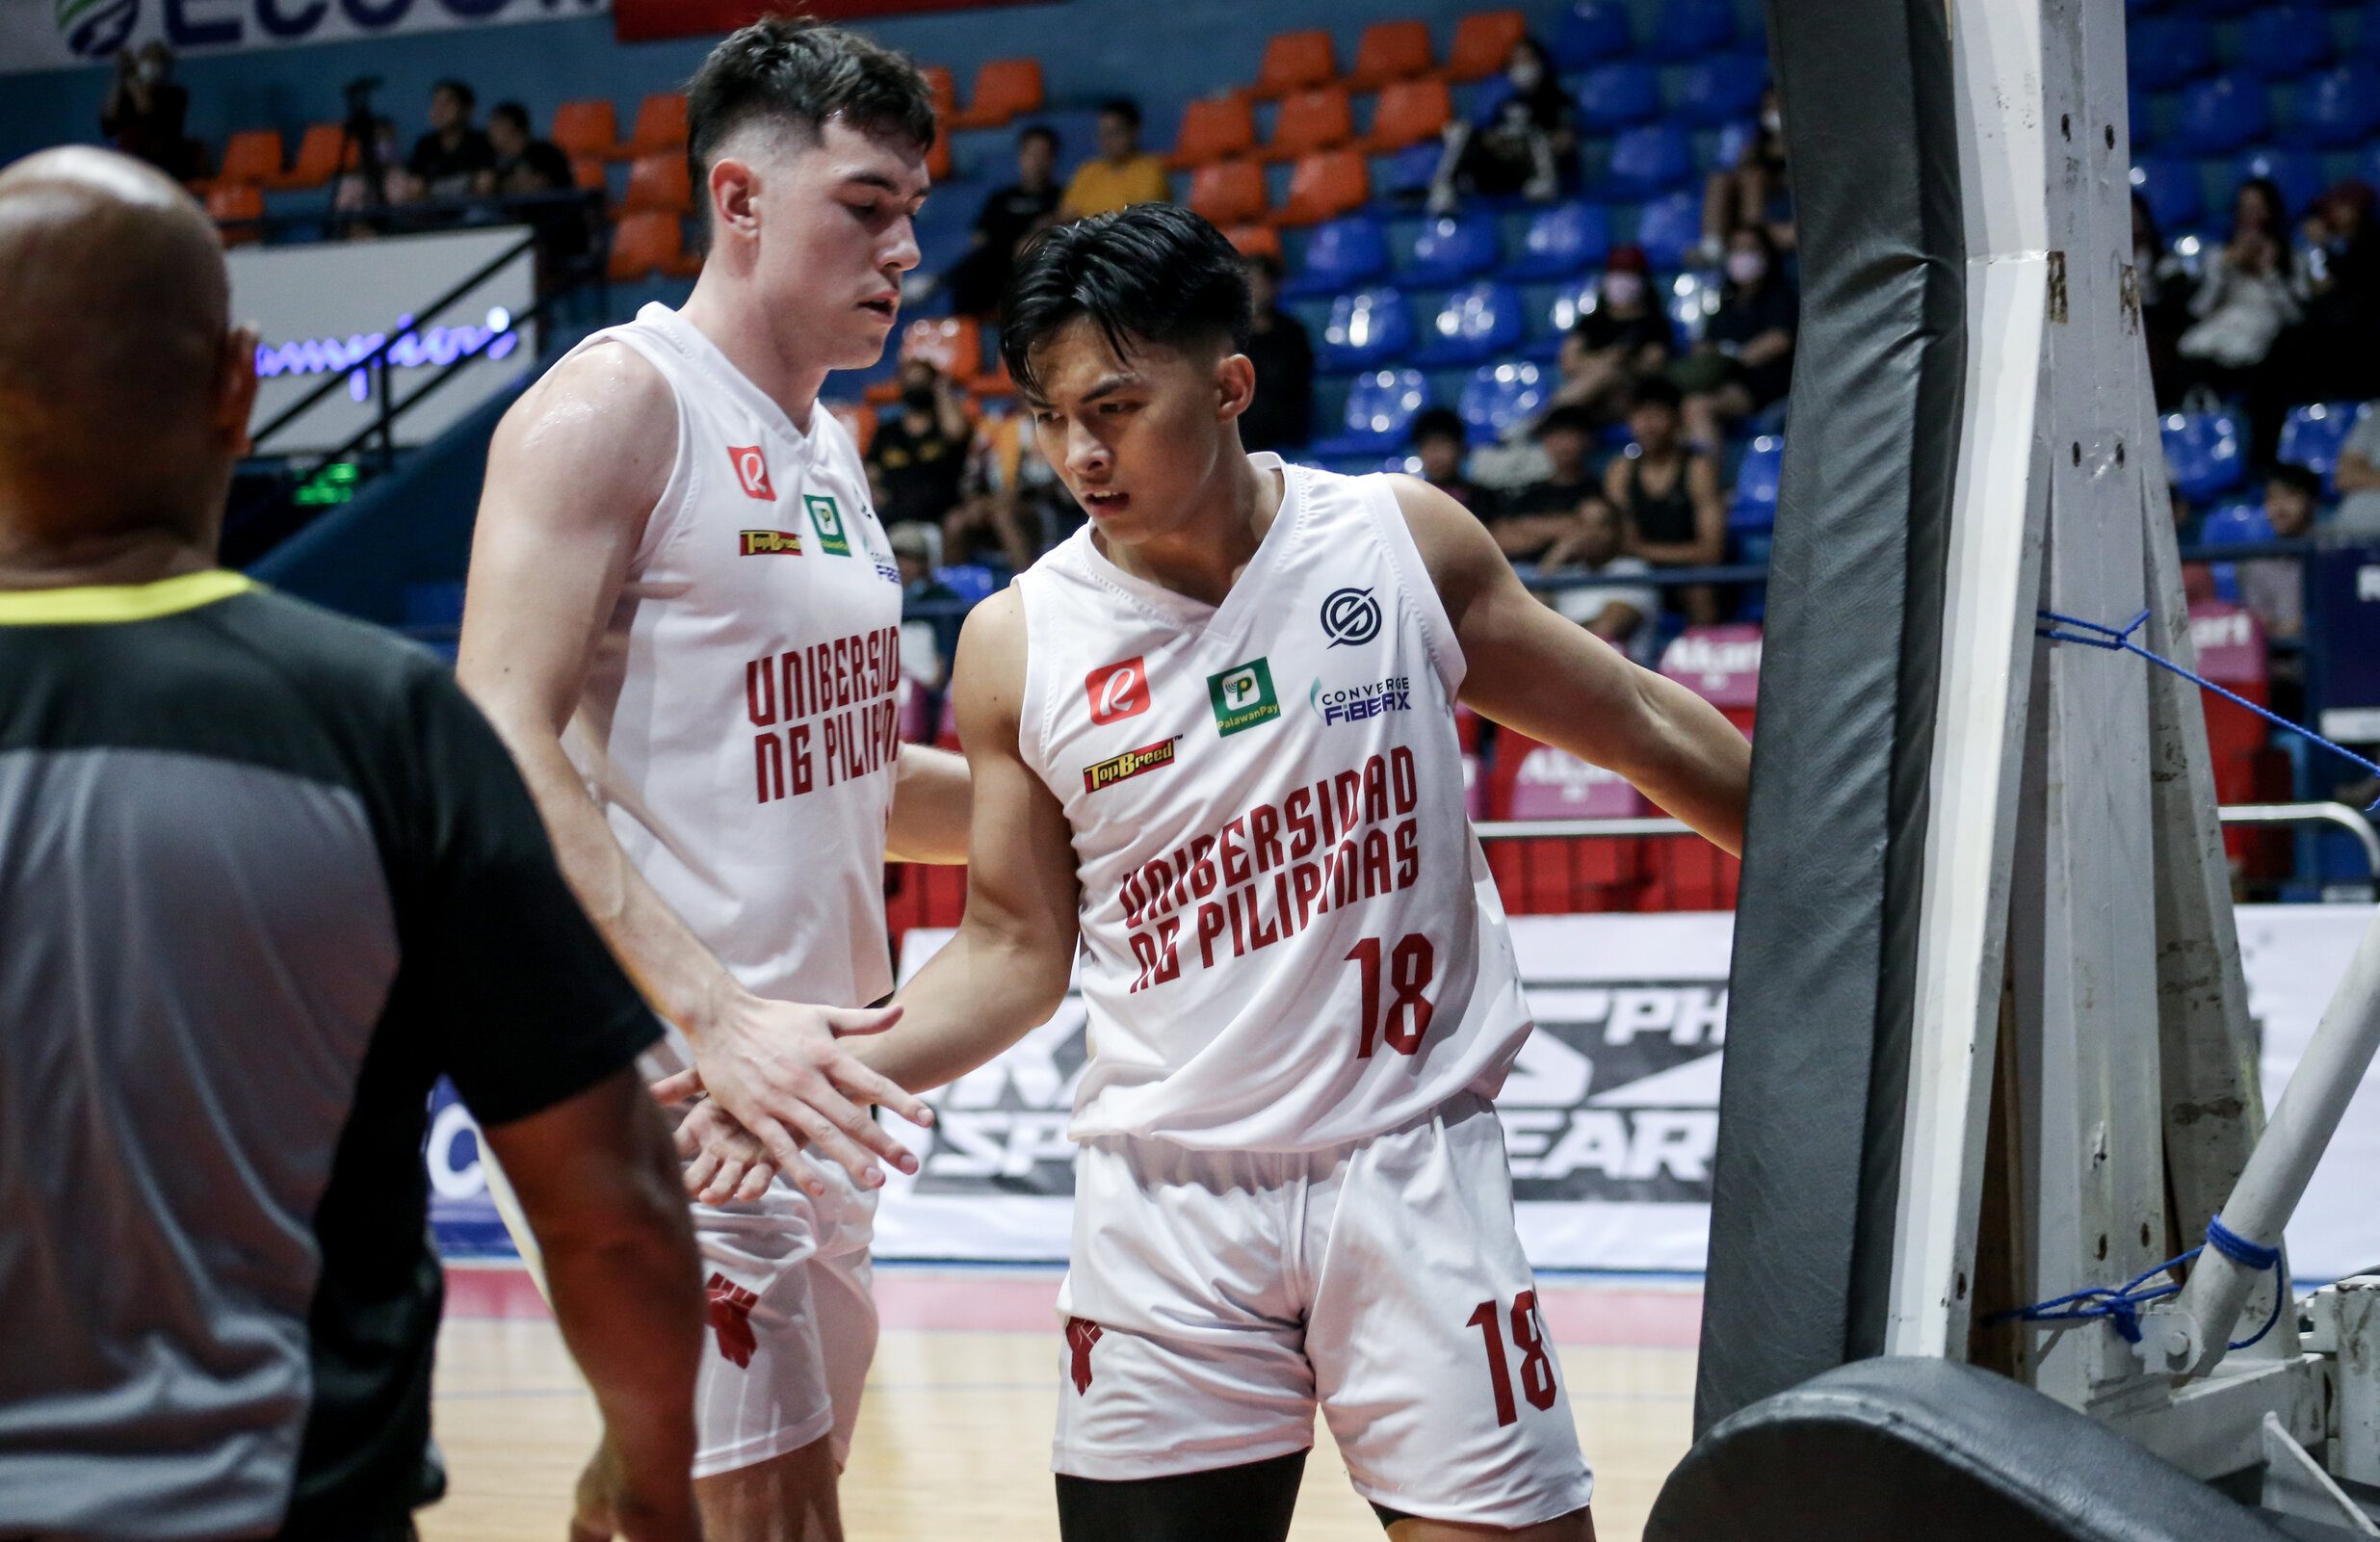 FilOil: UP, Ateneo post convincing wins to keep streaks going